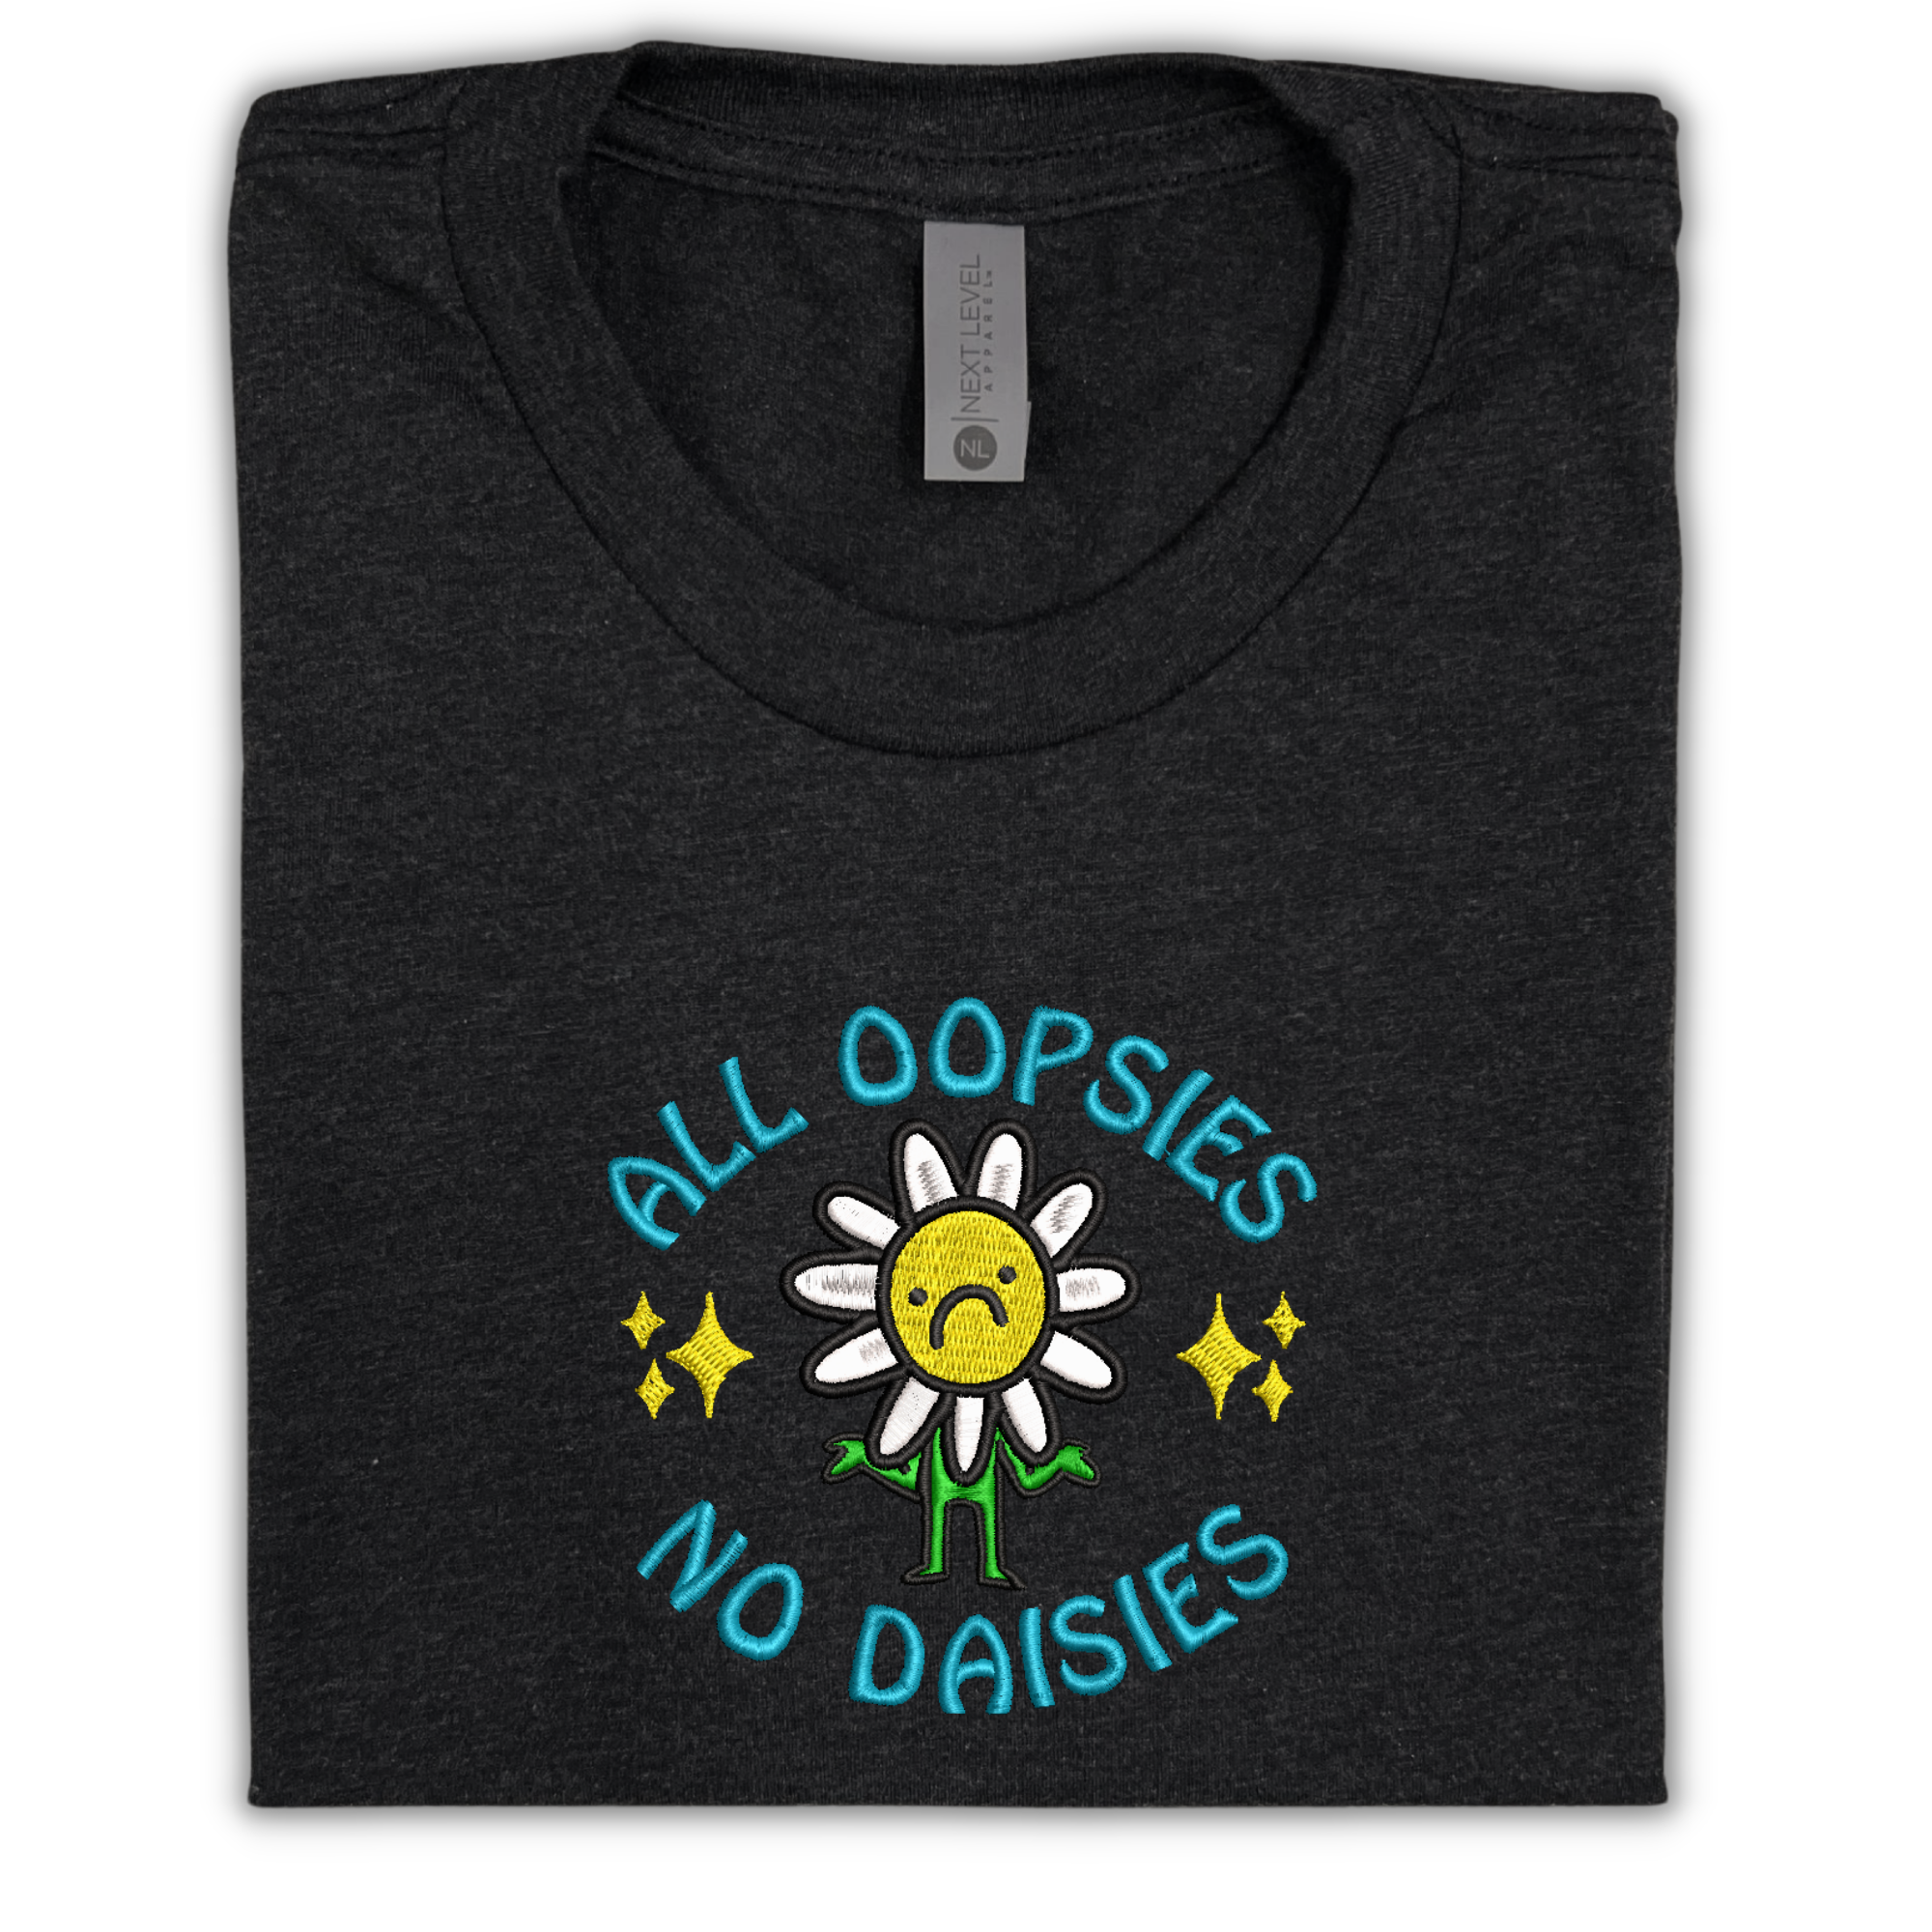 All Oopsies No Daisies Embroidered Tee Shirt, Unisex